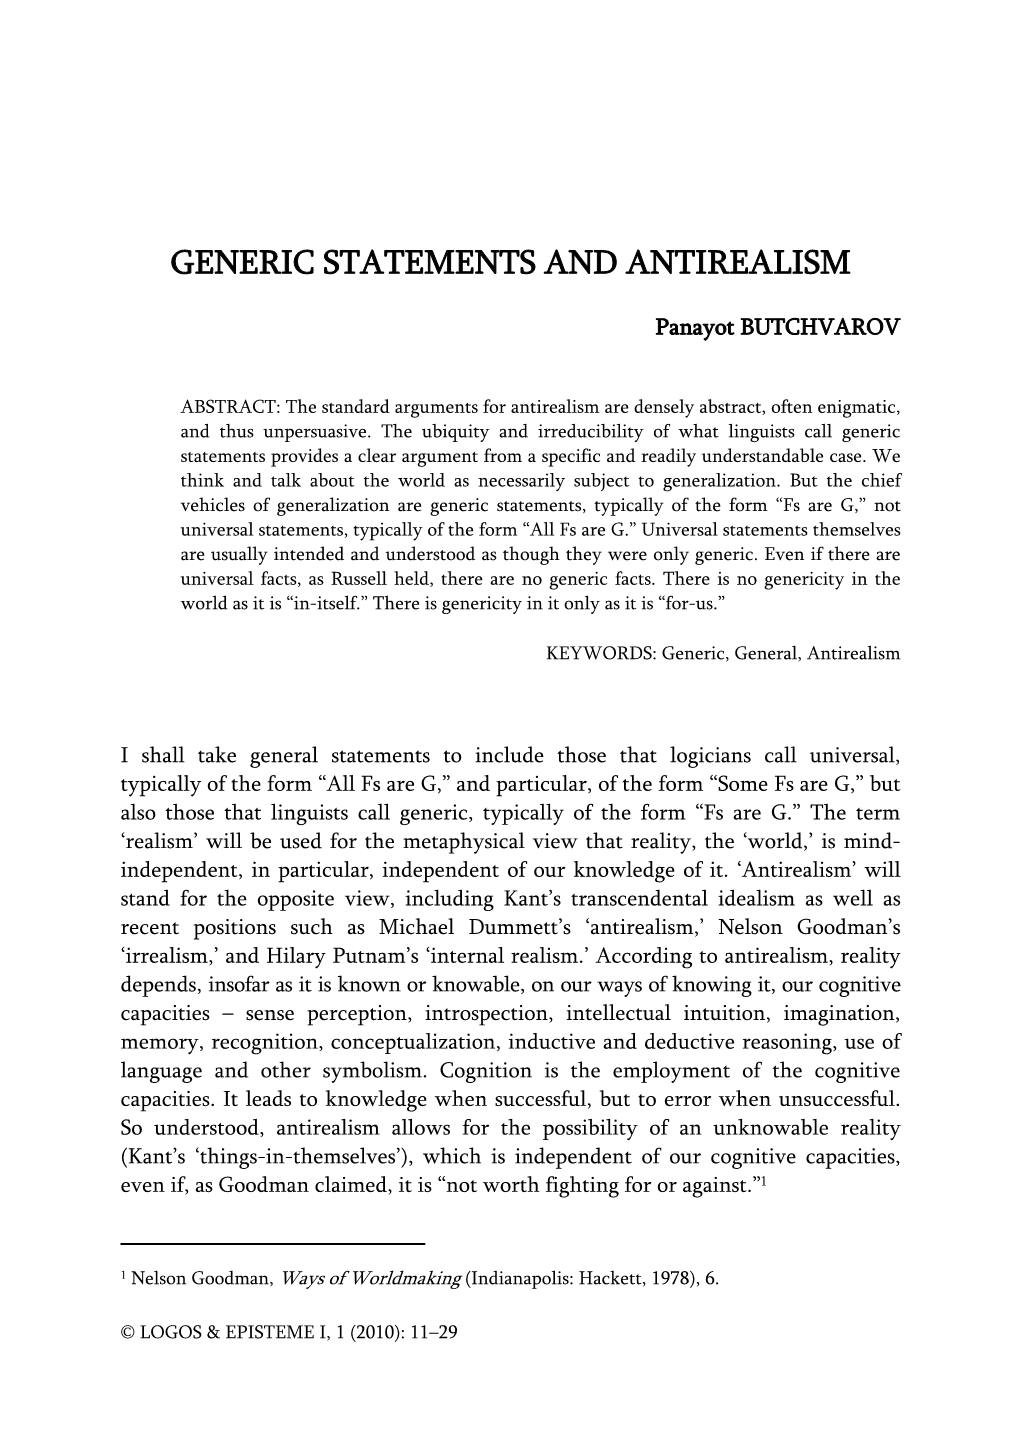 Generic Statements and Antirealism